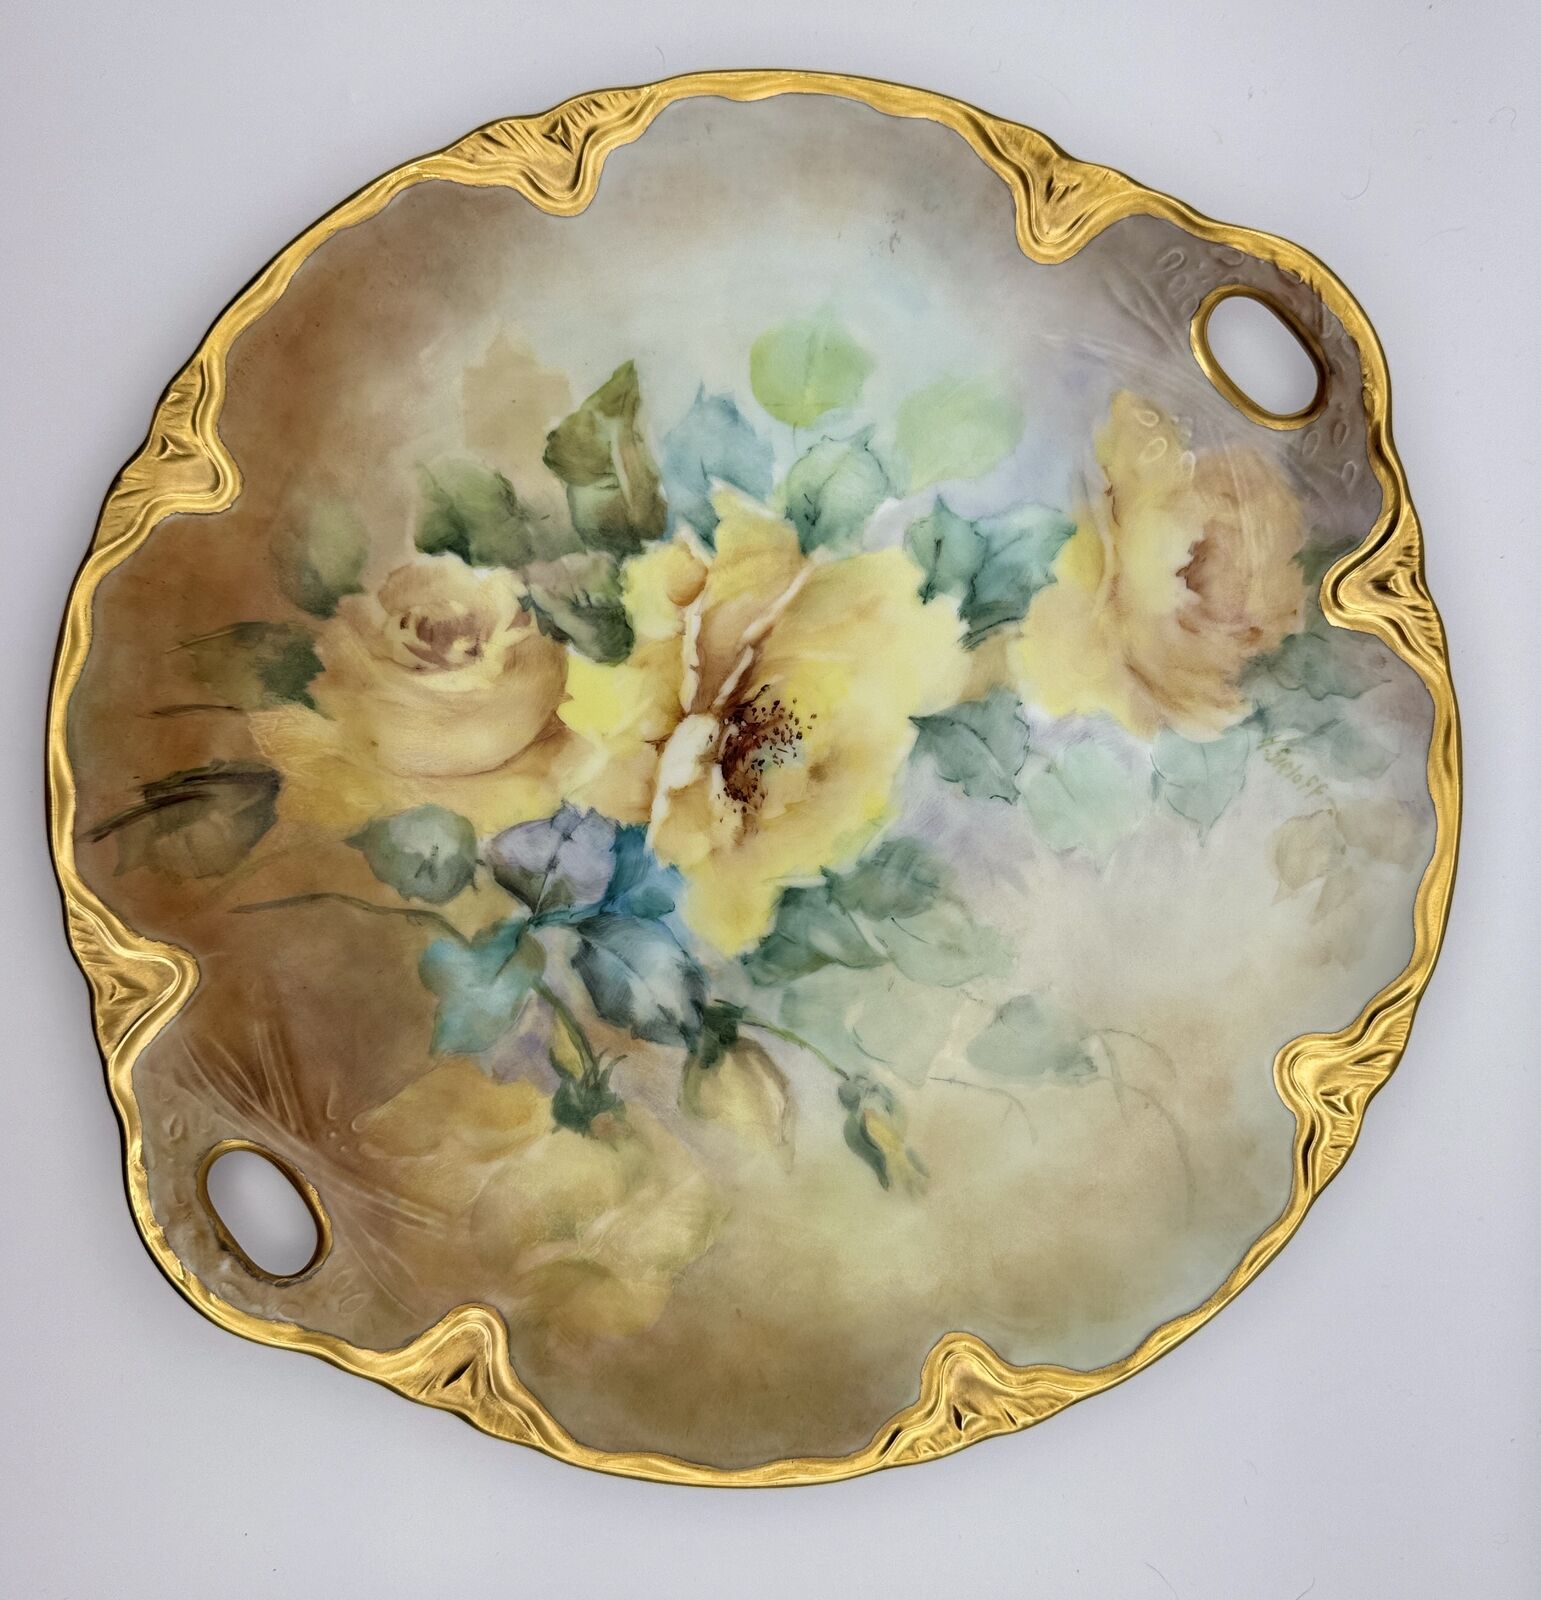 Hand-Painted  Tray with Yellow Roses & Gold Accents - Signed by H. Sieloff